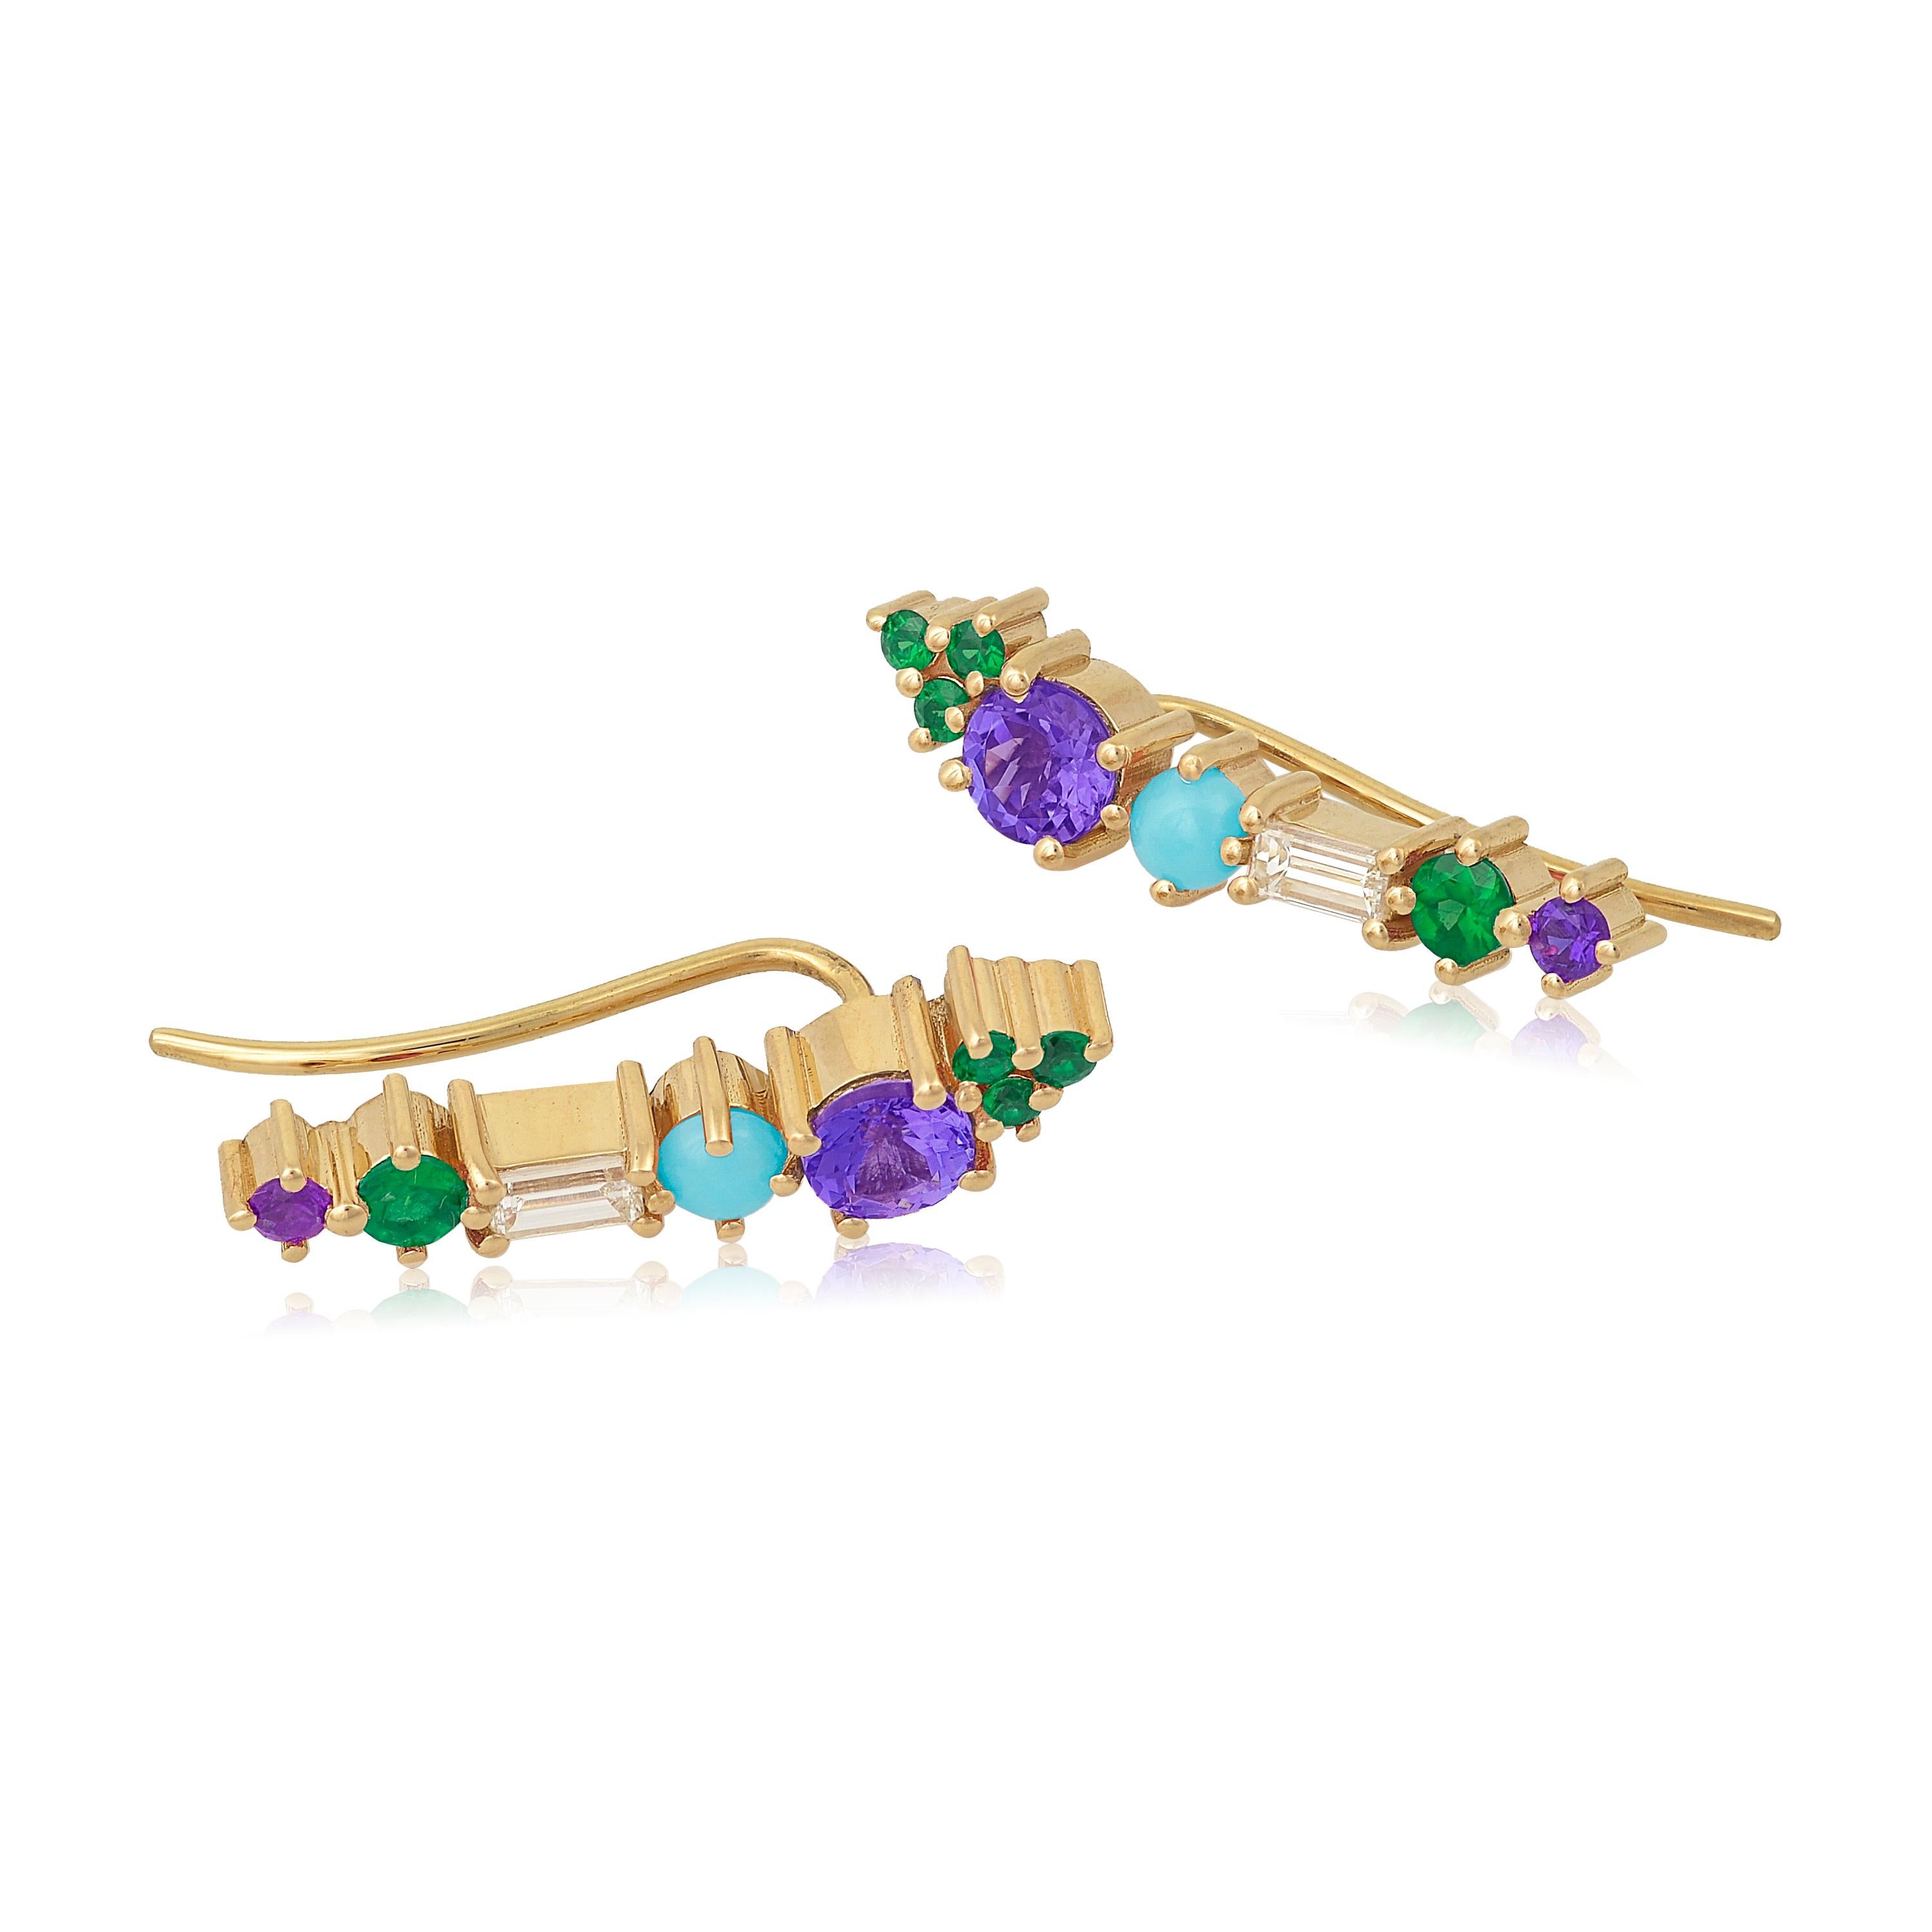 Designer: Alexia Gryllaki
Dimensions: L24x5mm
Weight: approximately 4.0g (pair)
Barcode: OFS050

Multi-stone ear climbers in 18 karat yellow gold with round faceted amethysts approx. 0.70cts, round faceted emeralds approx. 0.42cts, round cabochon